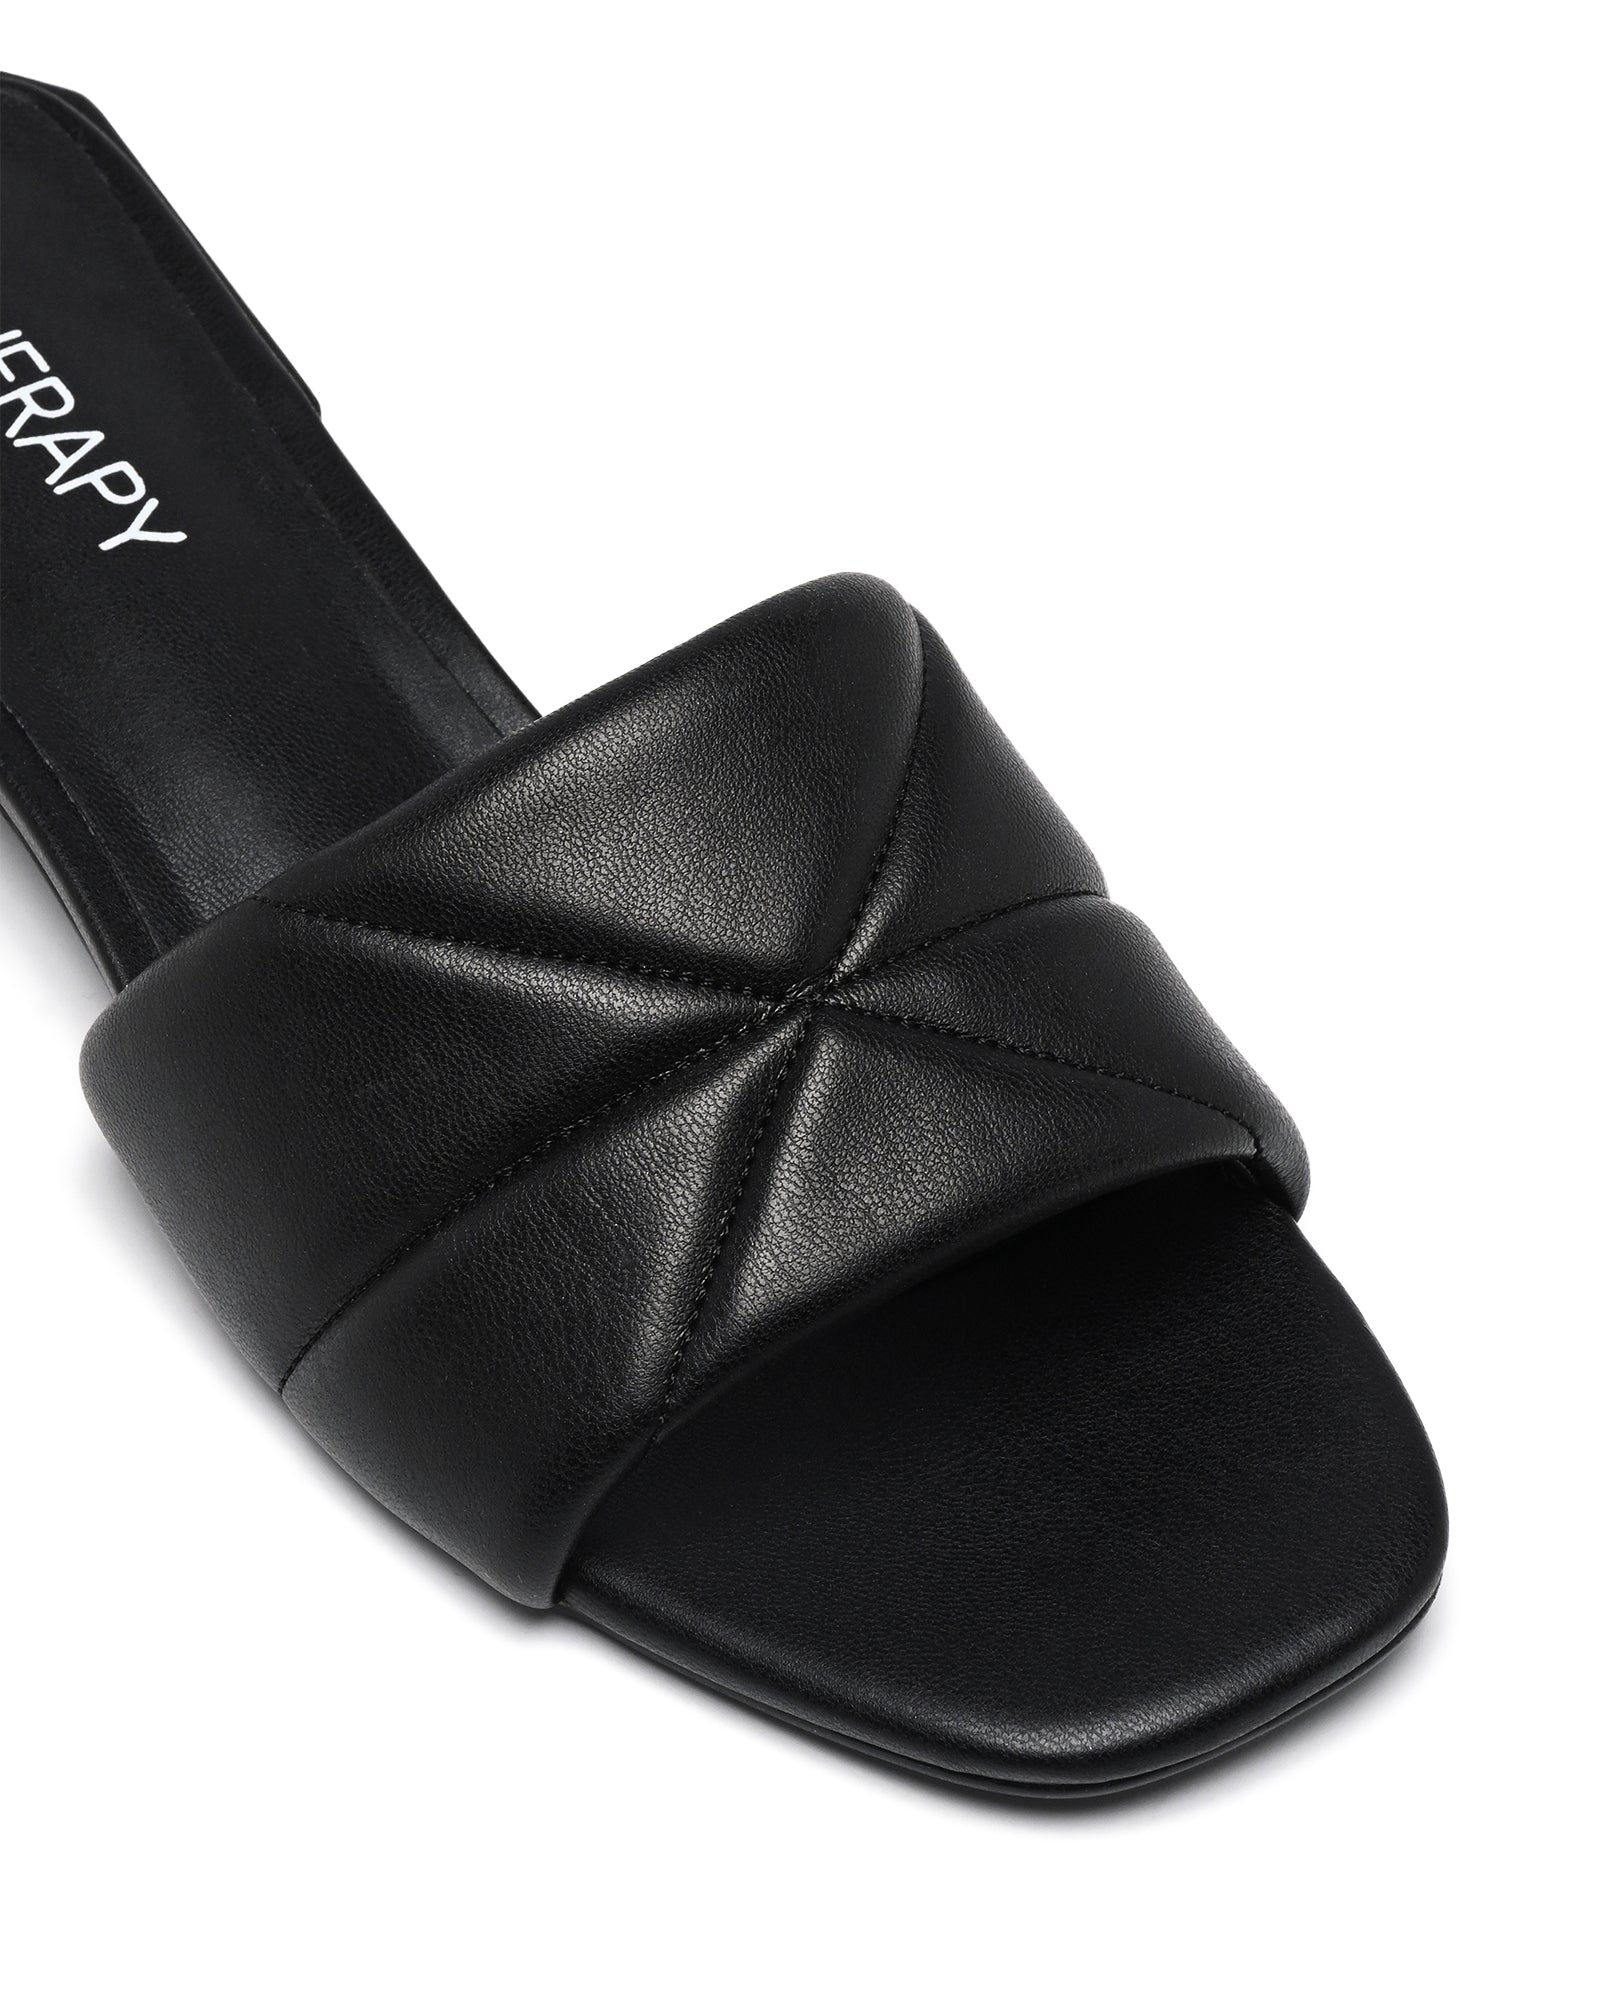 Therapy Shoes Everly Black | Women's Heels | Low Block Mule | Quilted 